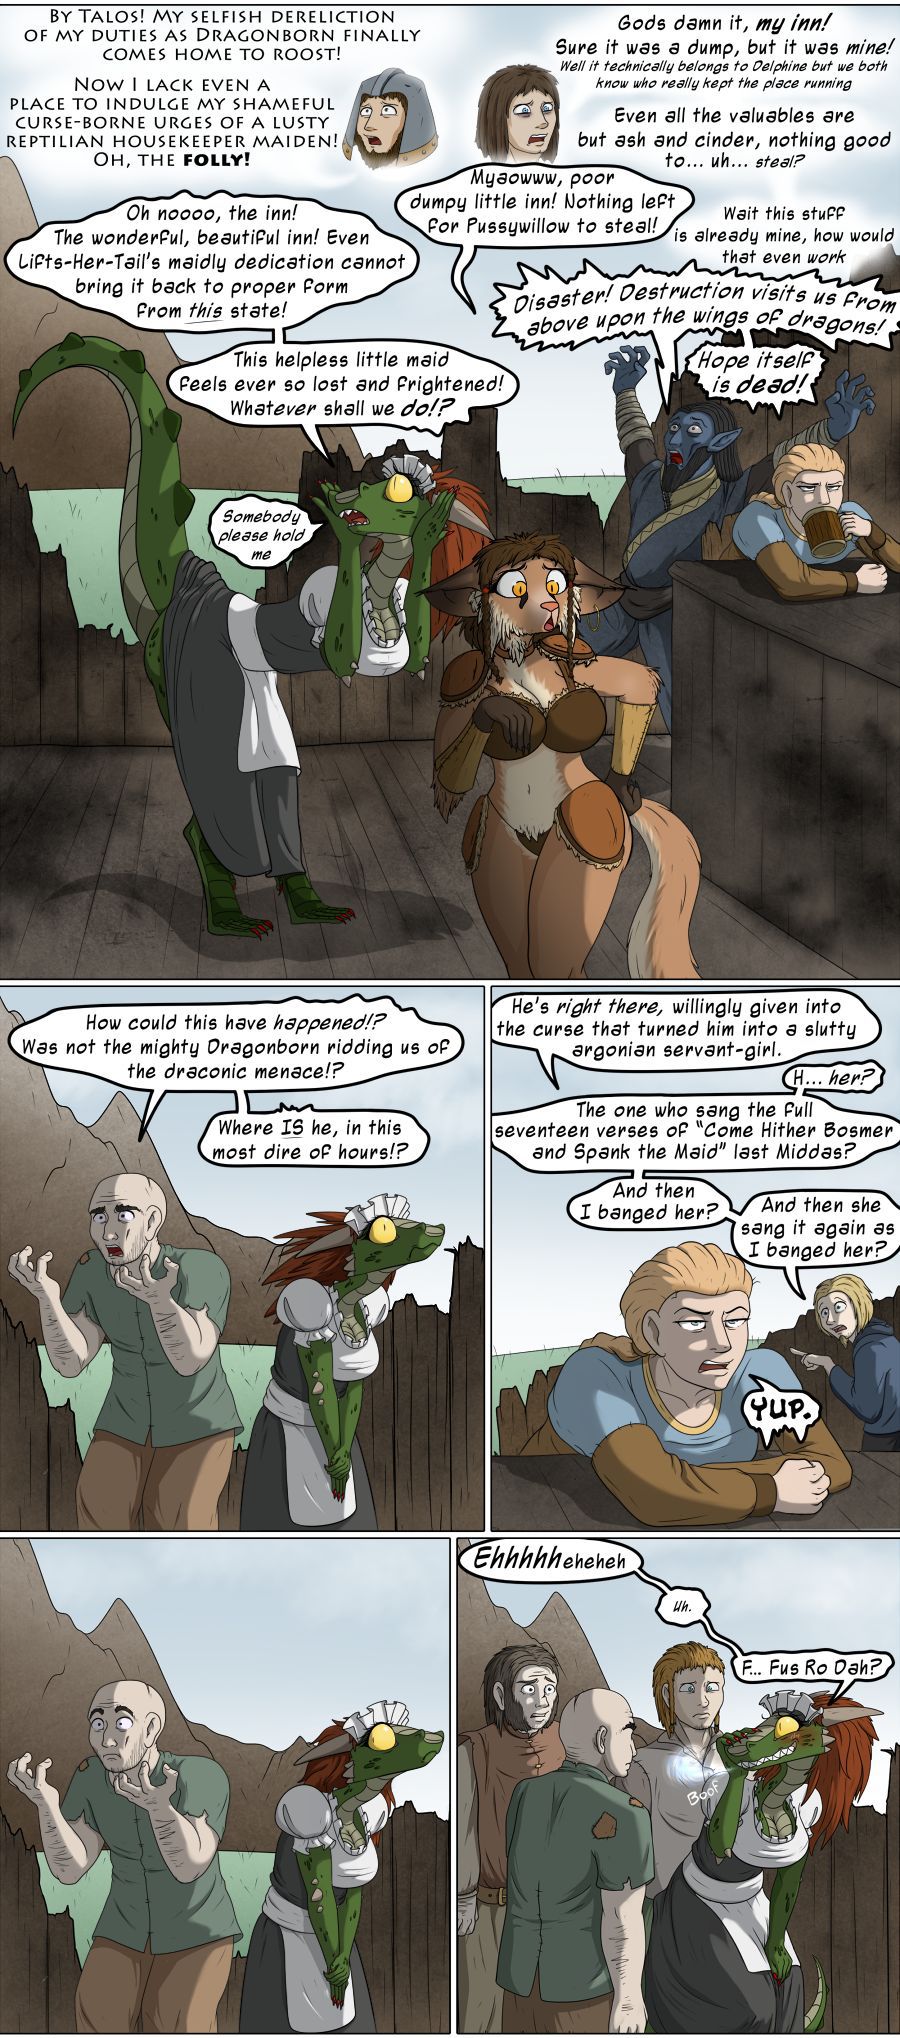 [Valsalia] Lusty Argonian Maid'd [Ongoing] 22